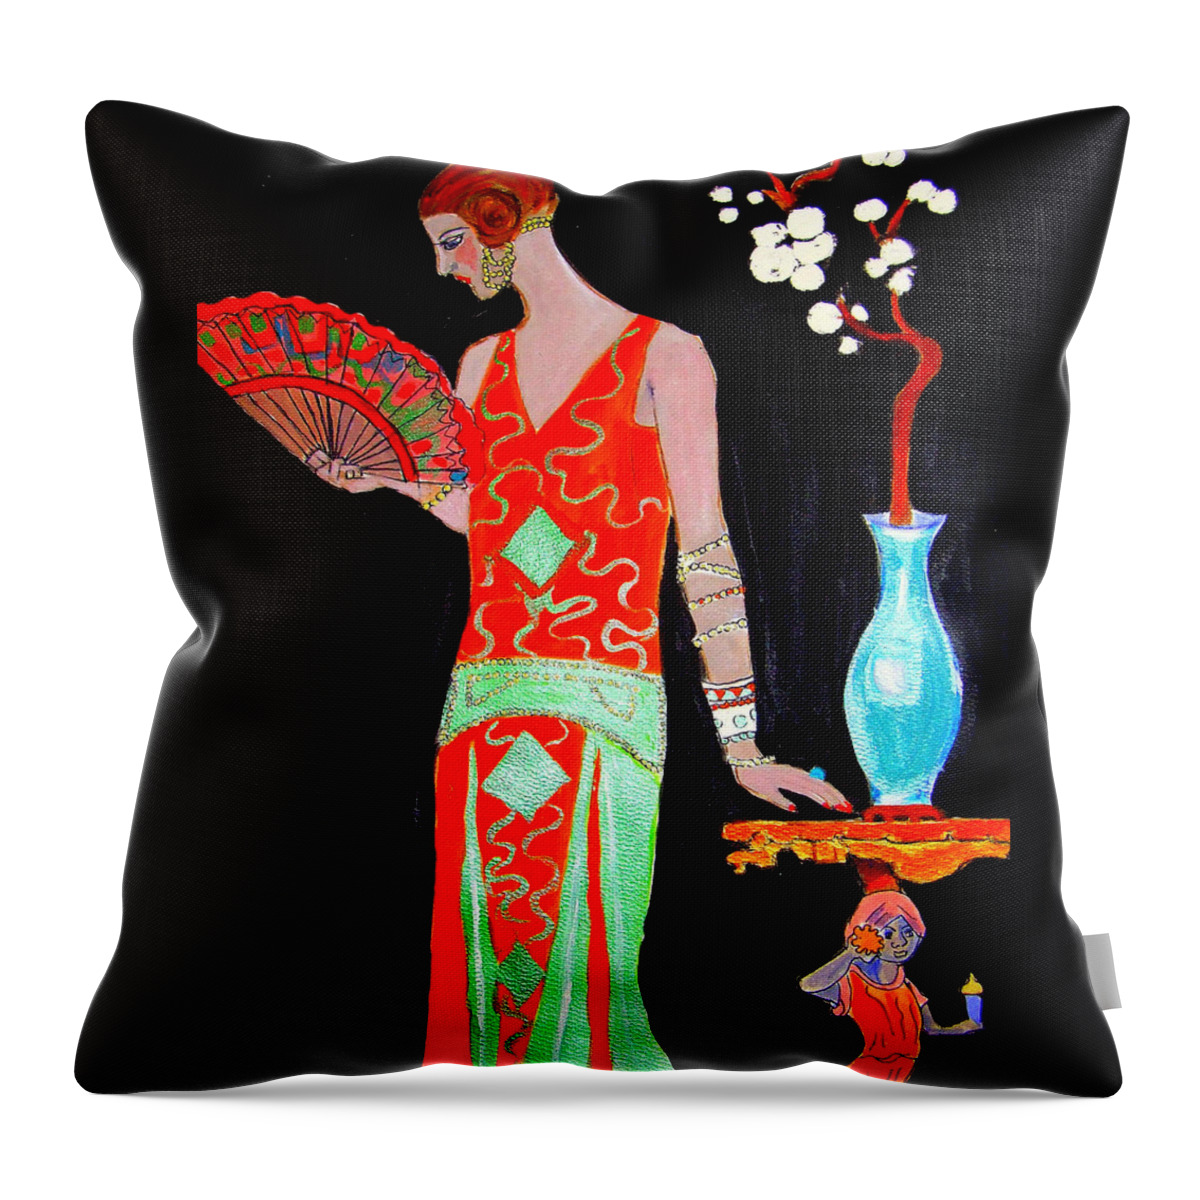 Parisian Art Deco Throw Pillow featuring the painting Jazz Age by Rusty Gladdish